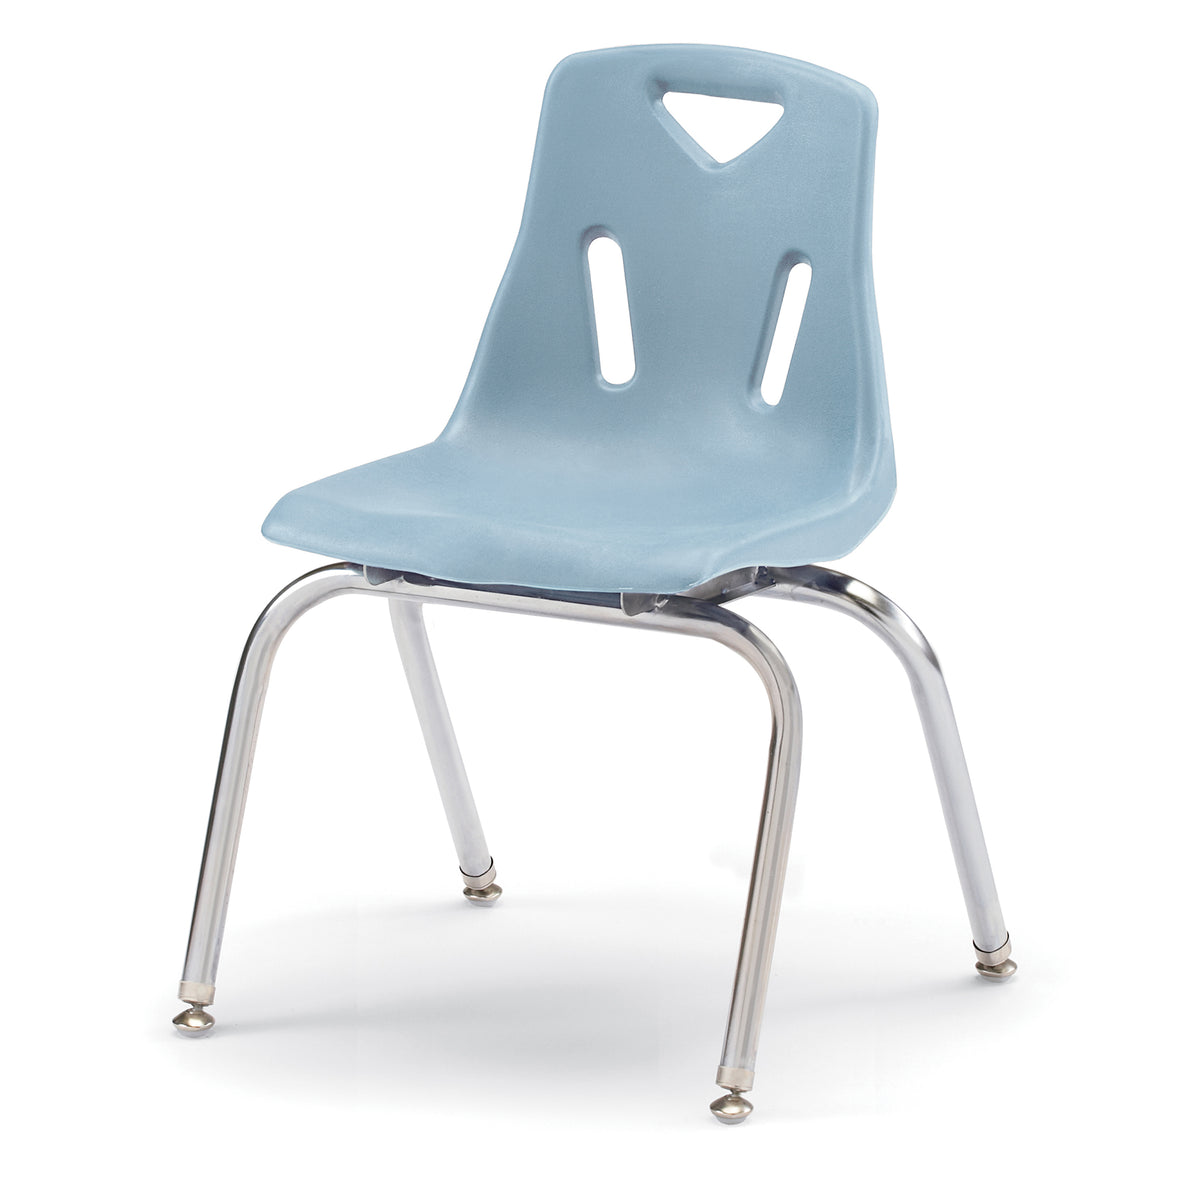 8146JC1131, Berries Stacking Chair with Chrome-Plated Legs - 16" Ht - Coastal Blue